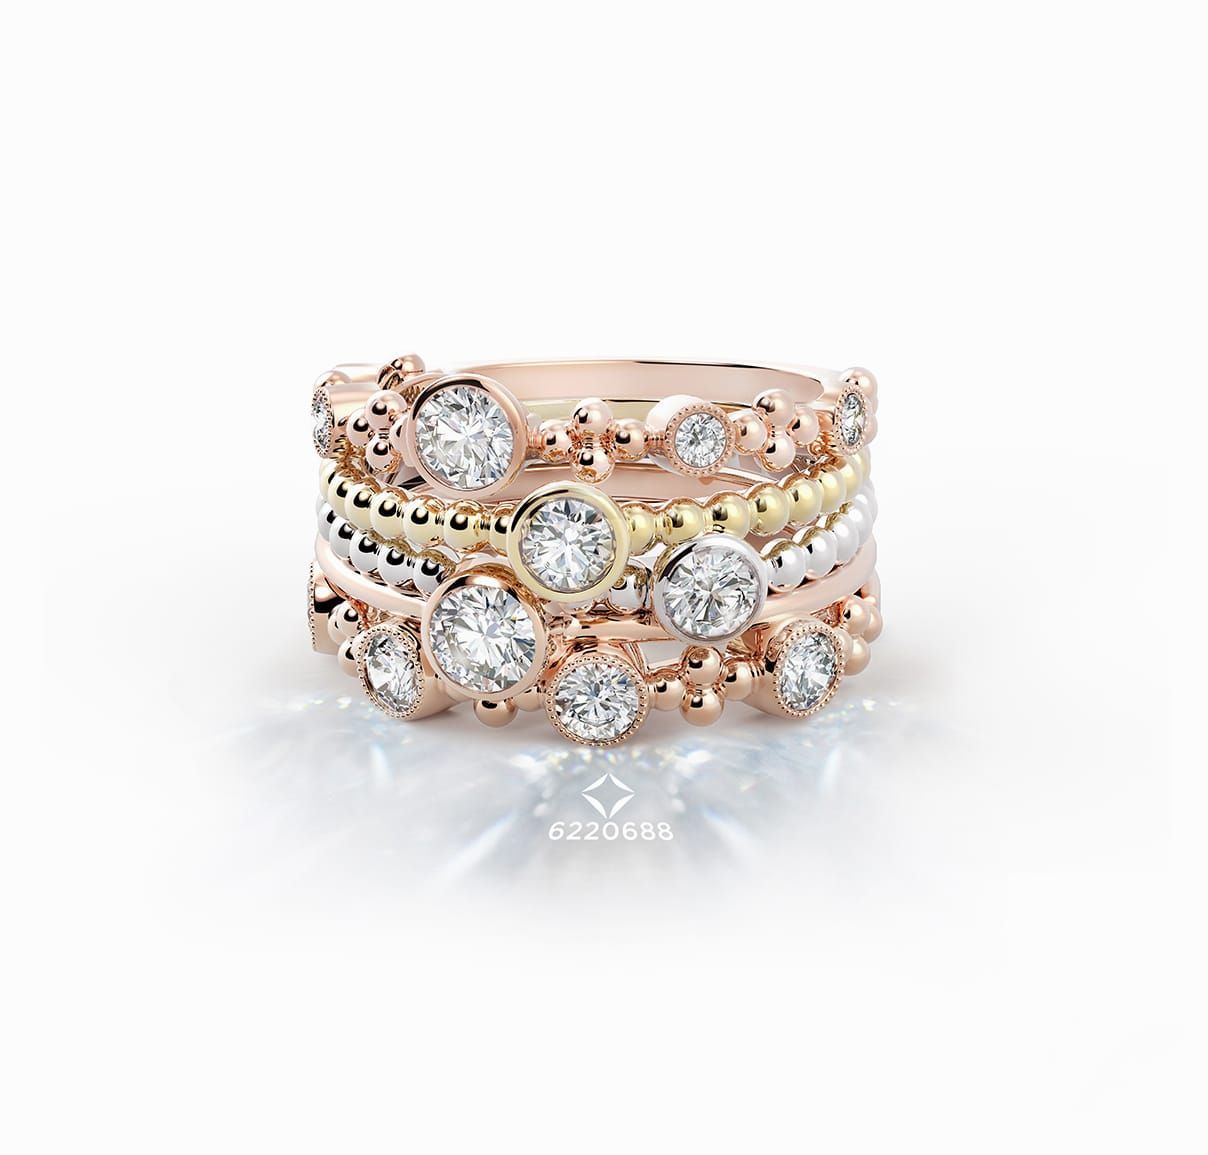 The Forevermark Tribute™ Collection | Diamond Jewelry Throughout Most Recent Diamond Three Row Collar Anniversary Bands In White Gold (View 8 of 25)